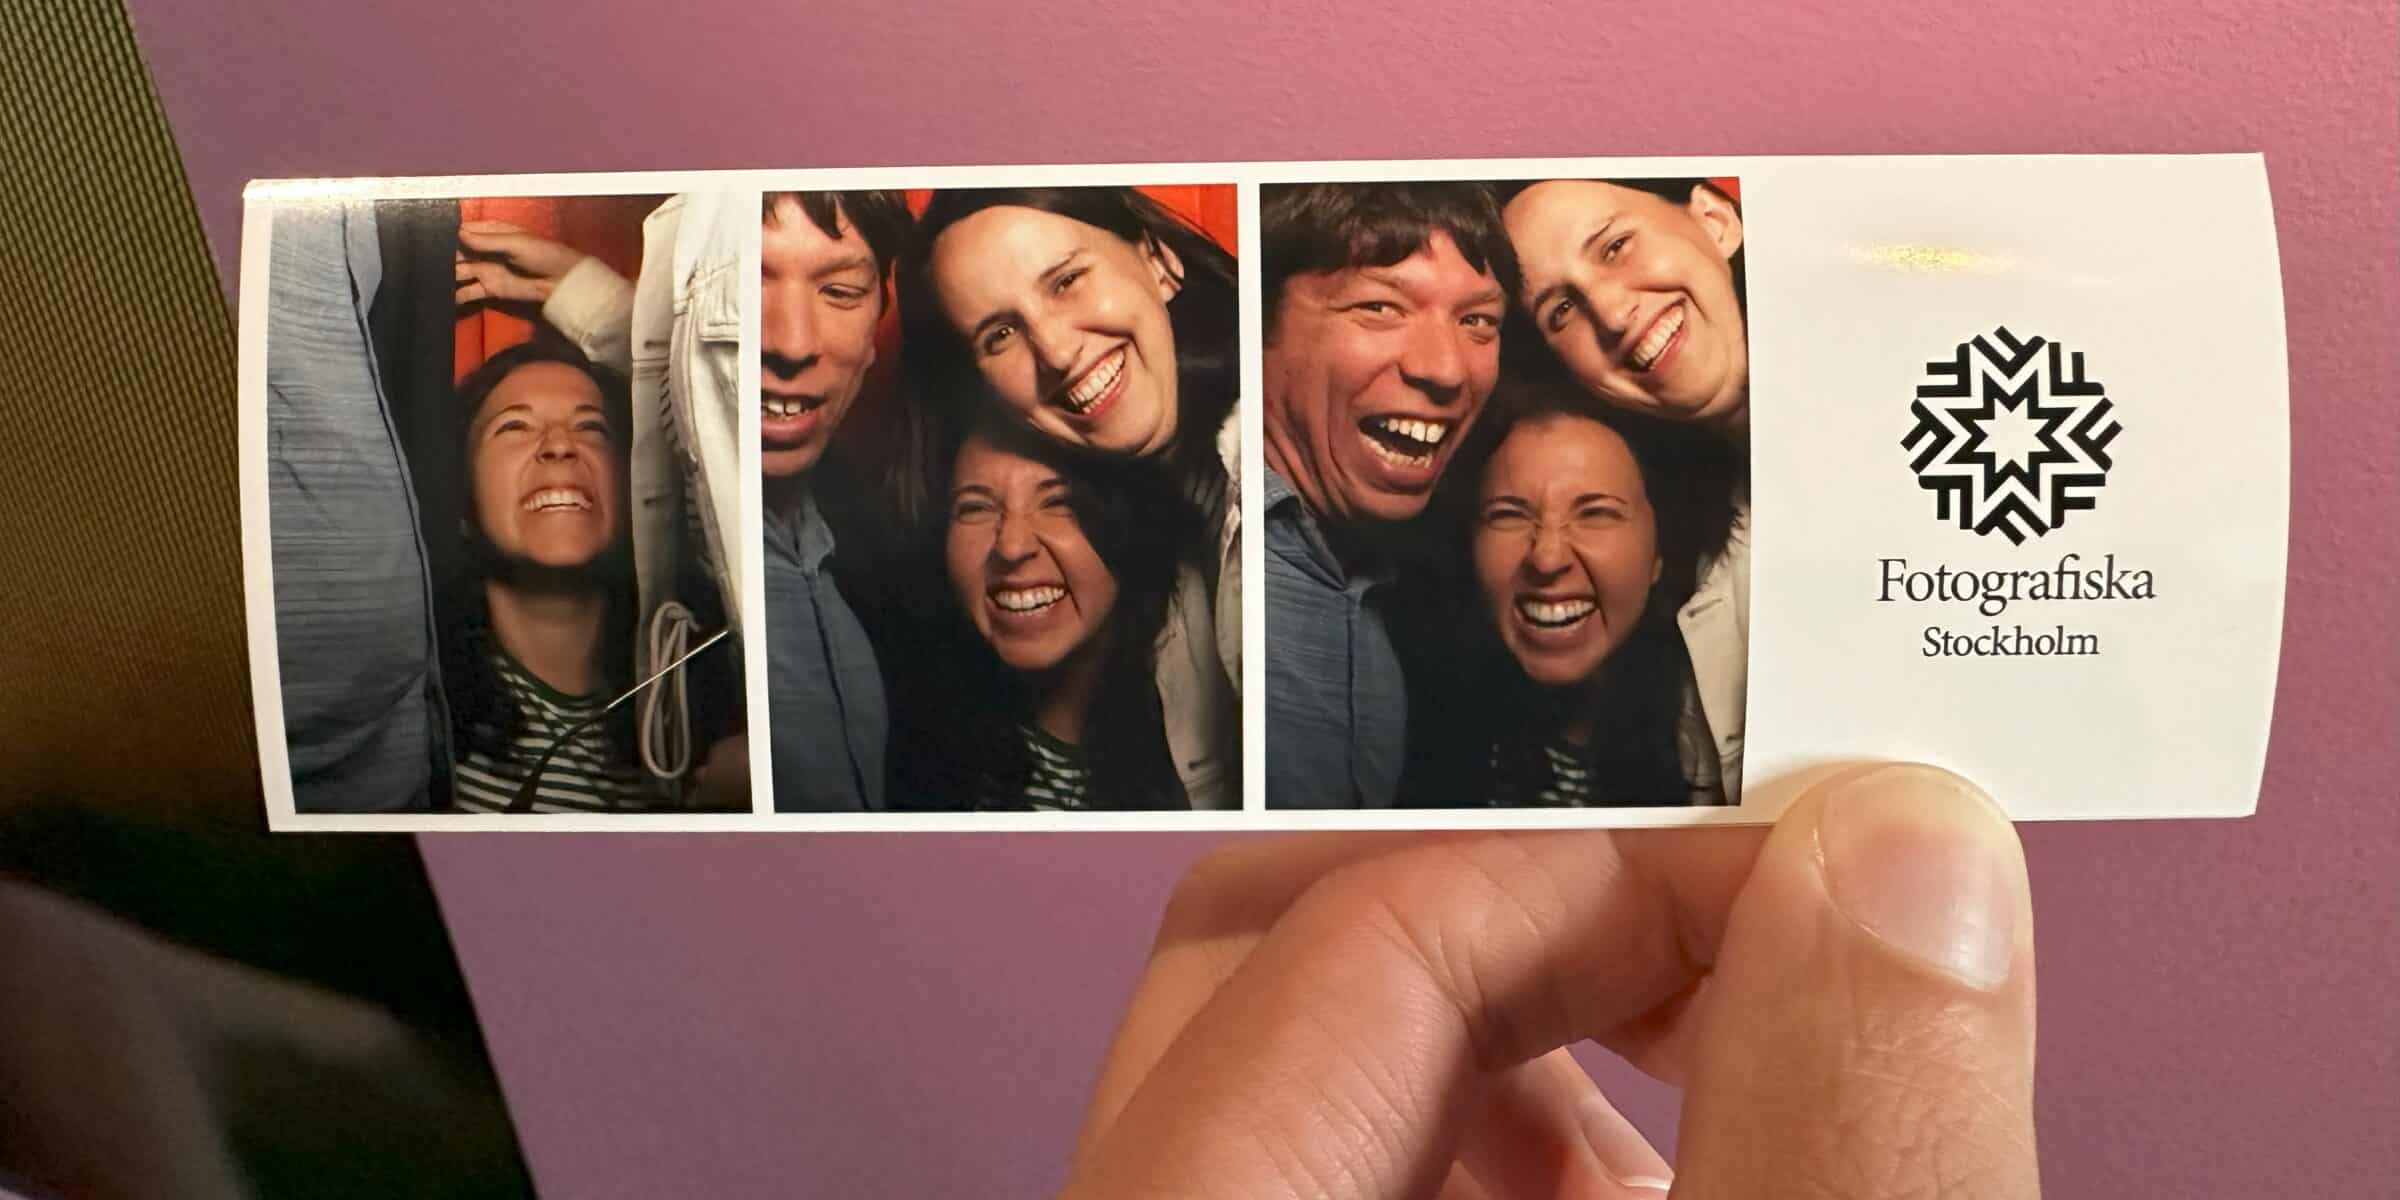 That time we got very confused by a photo booth